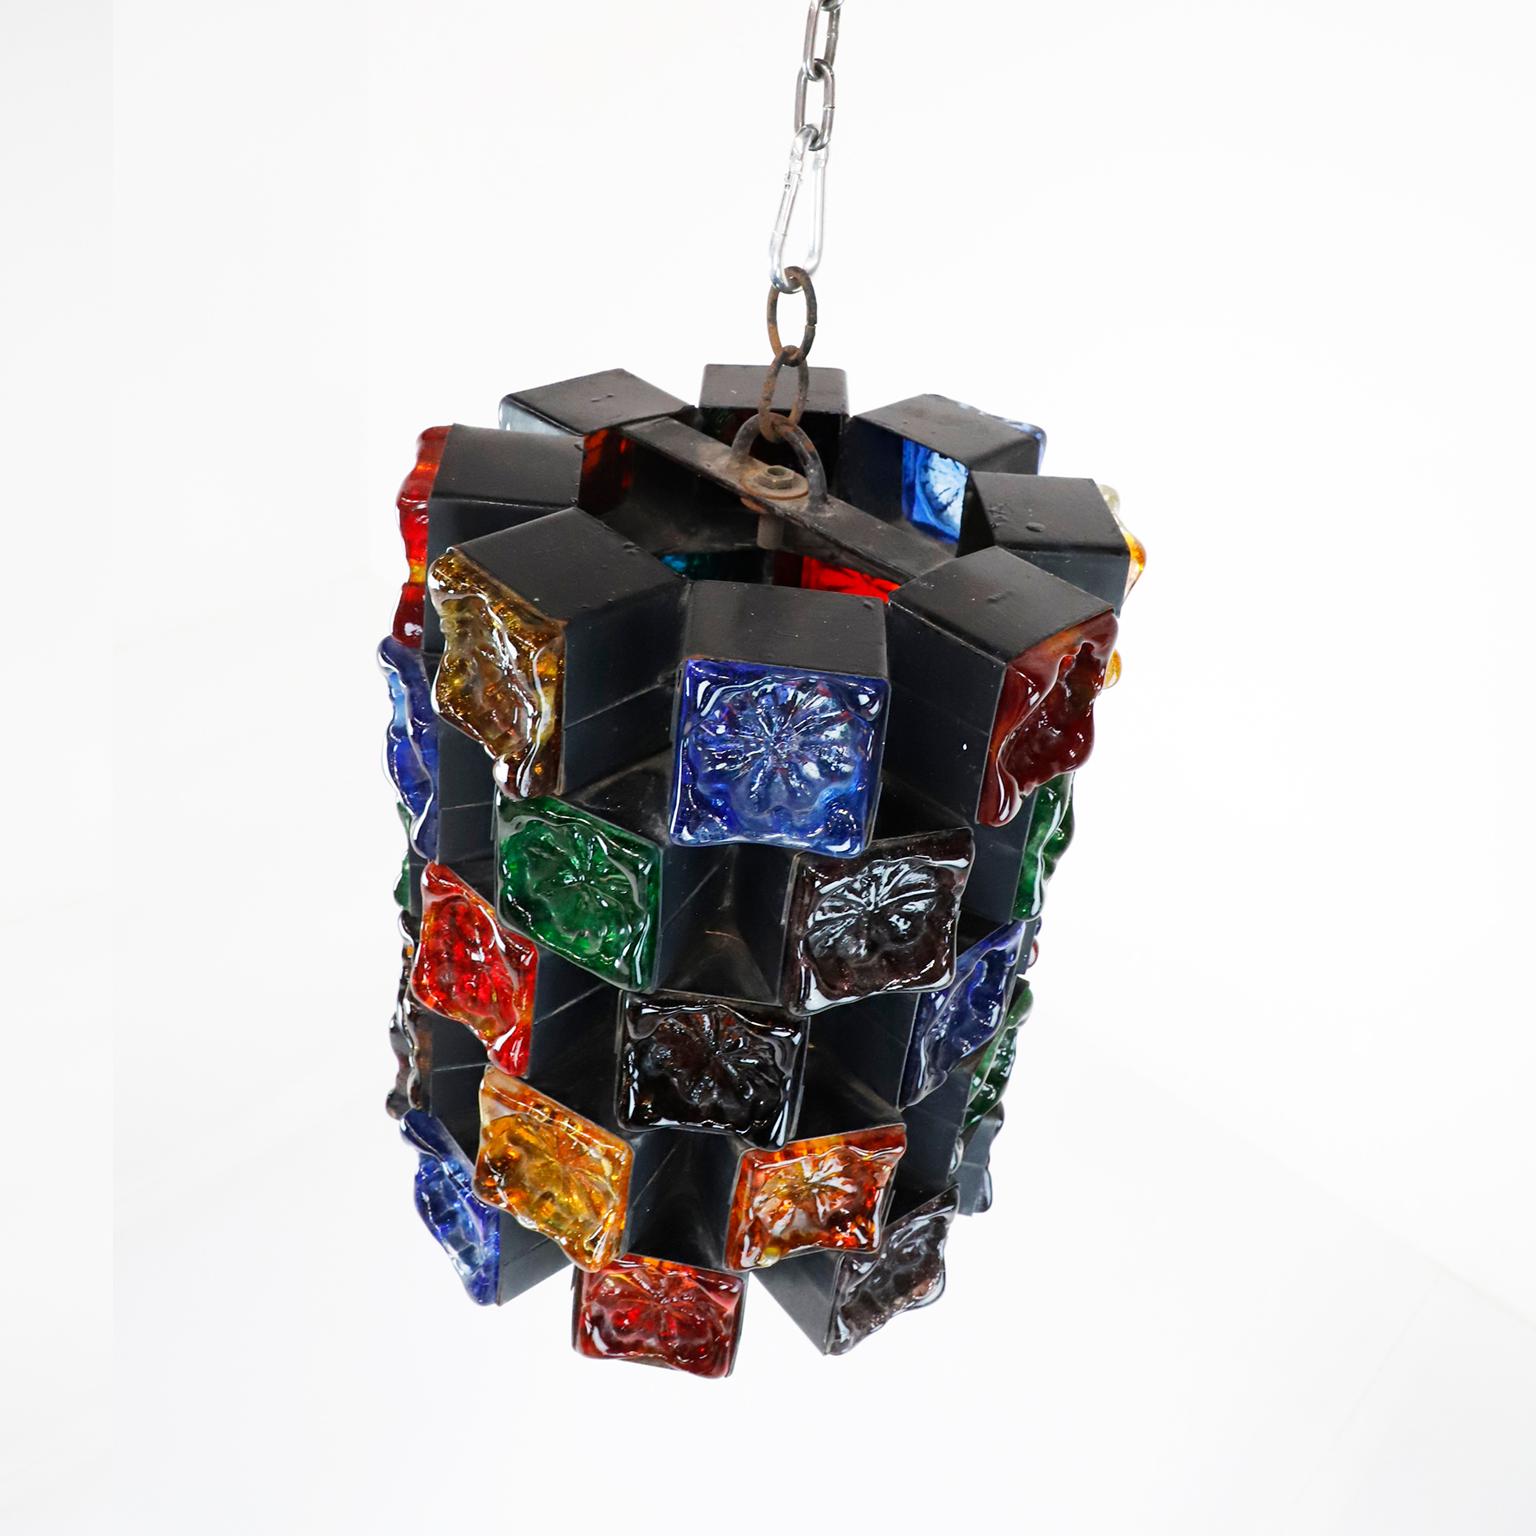 Circa 1970, we offer these original pendant light, these are one of the most stunning samples of Brutalist art designed by Felipe Delfinger. Made of iron and multicolored blown glass.